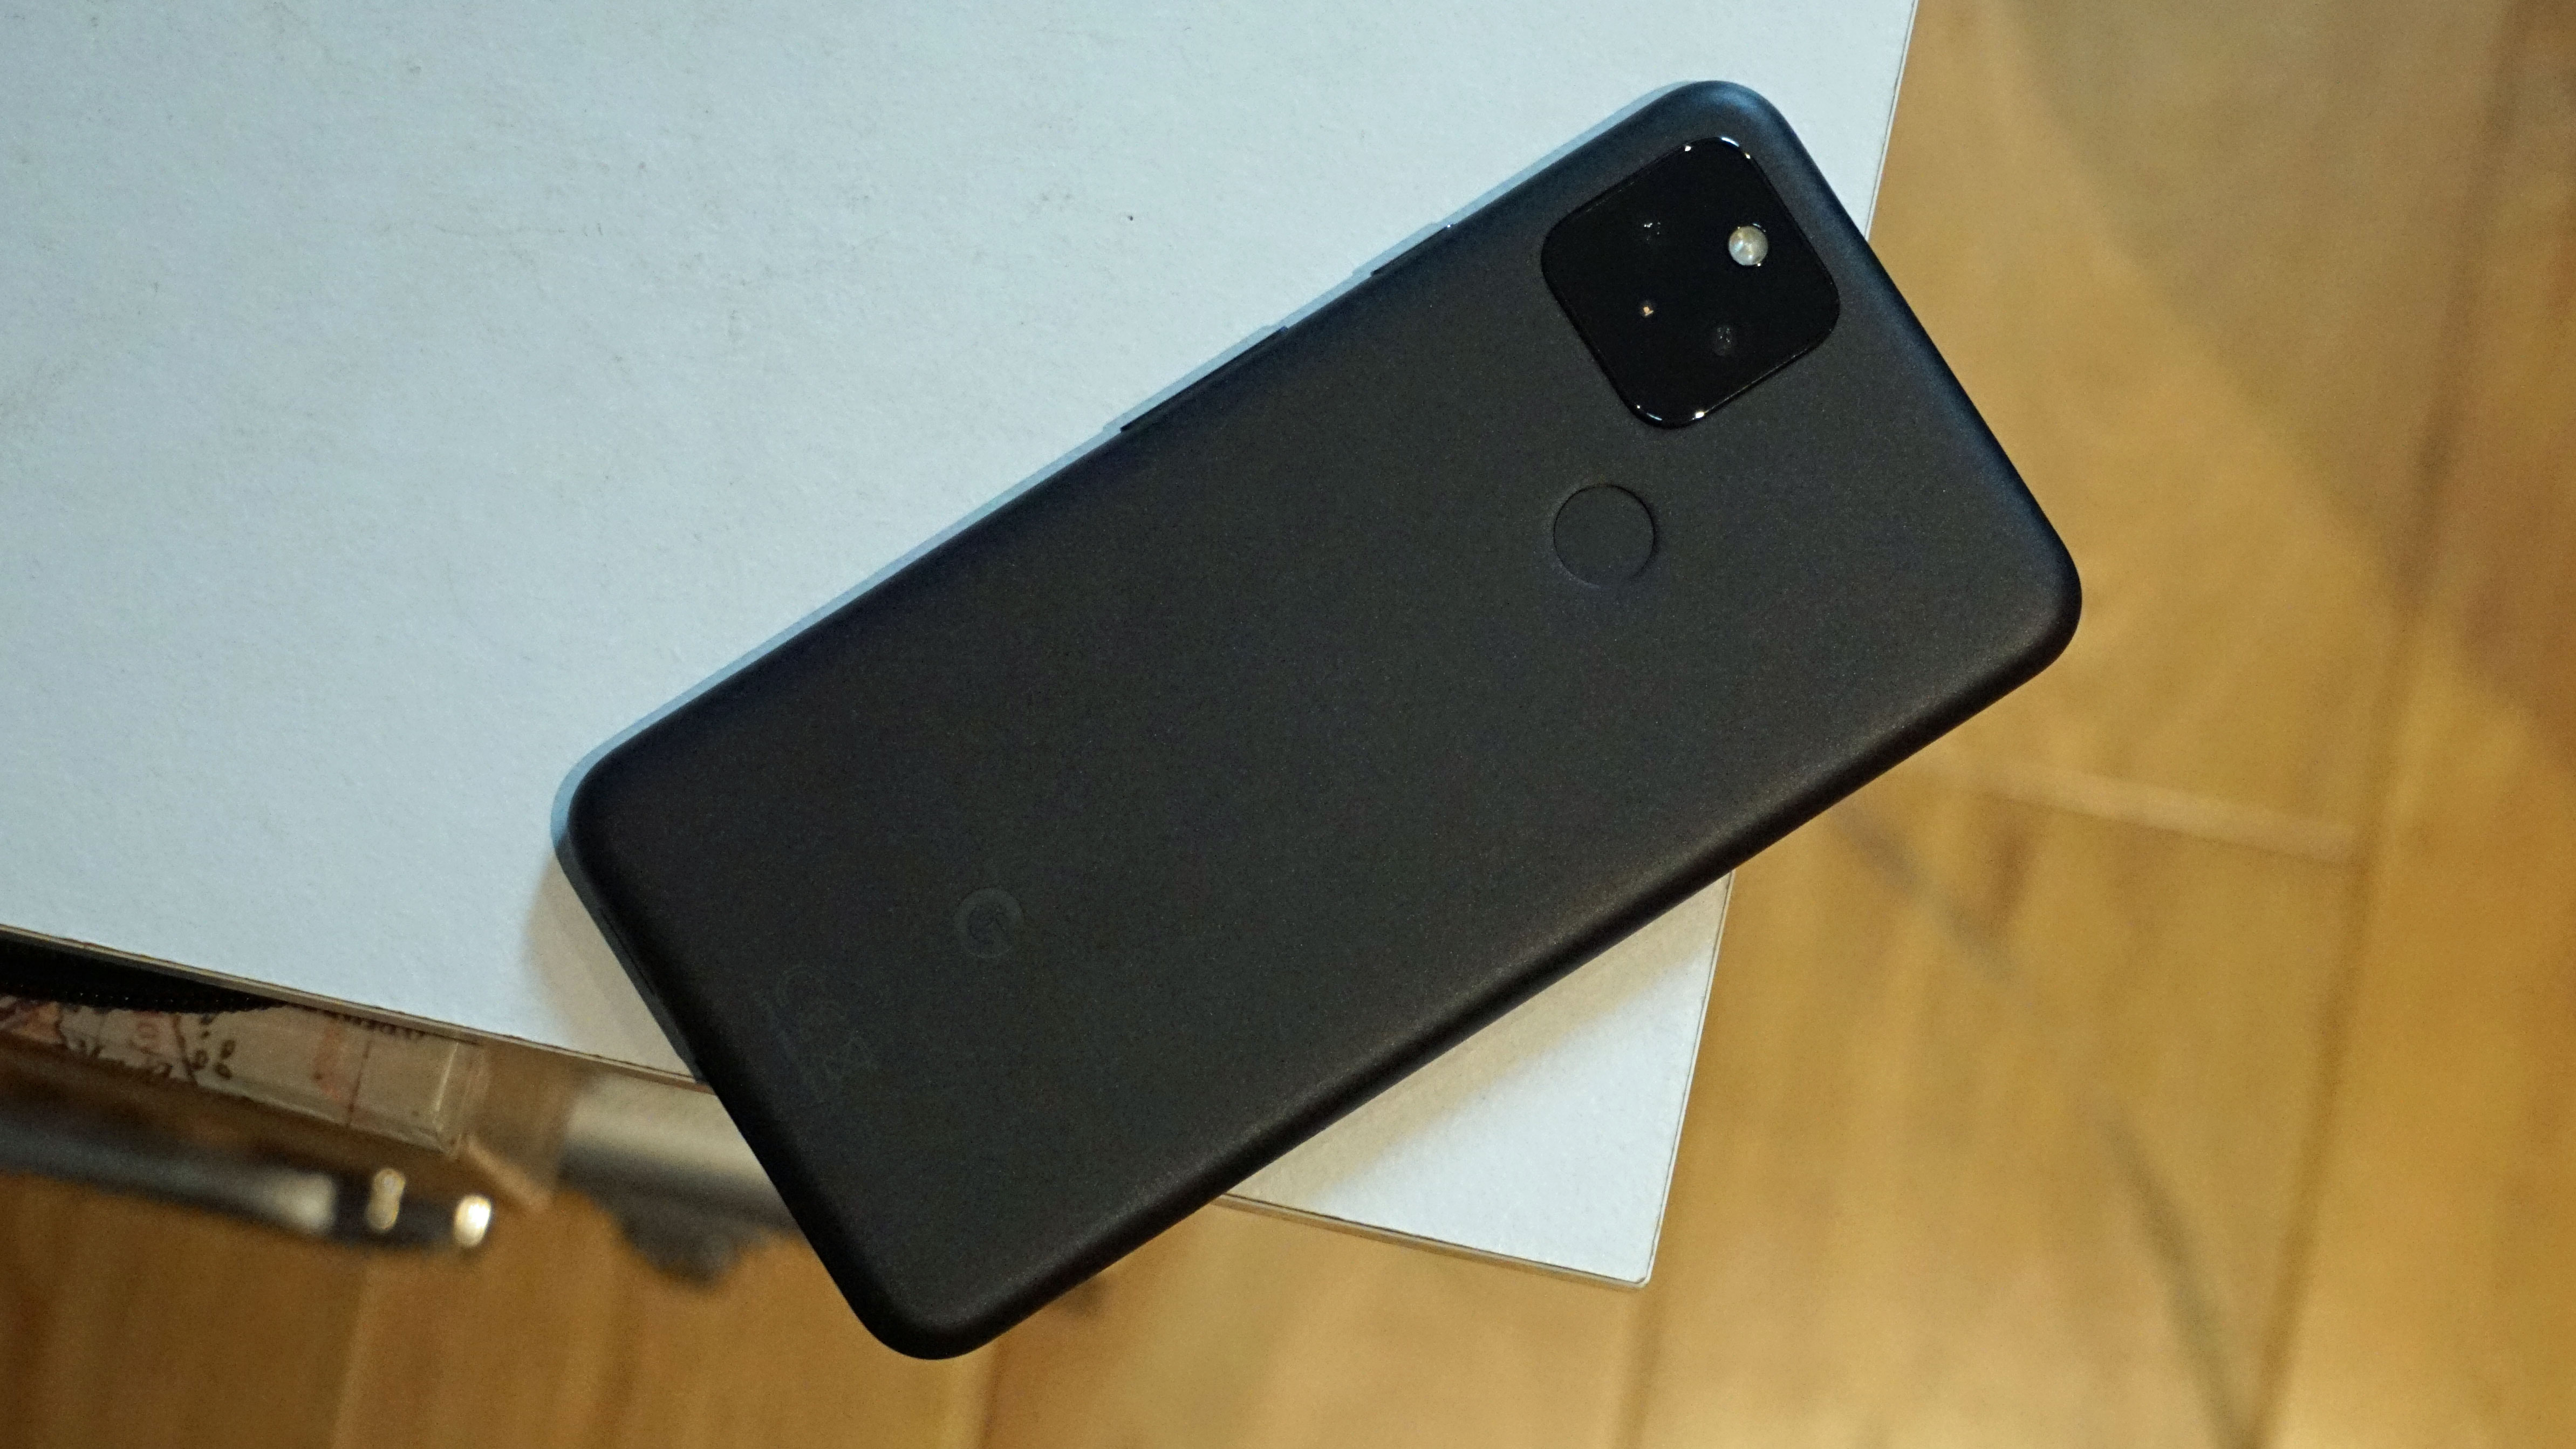 Google Pixel 5 review: an affordable flagship with some